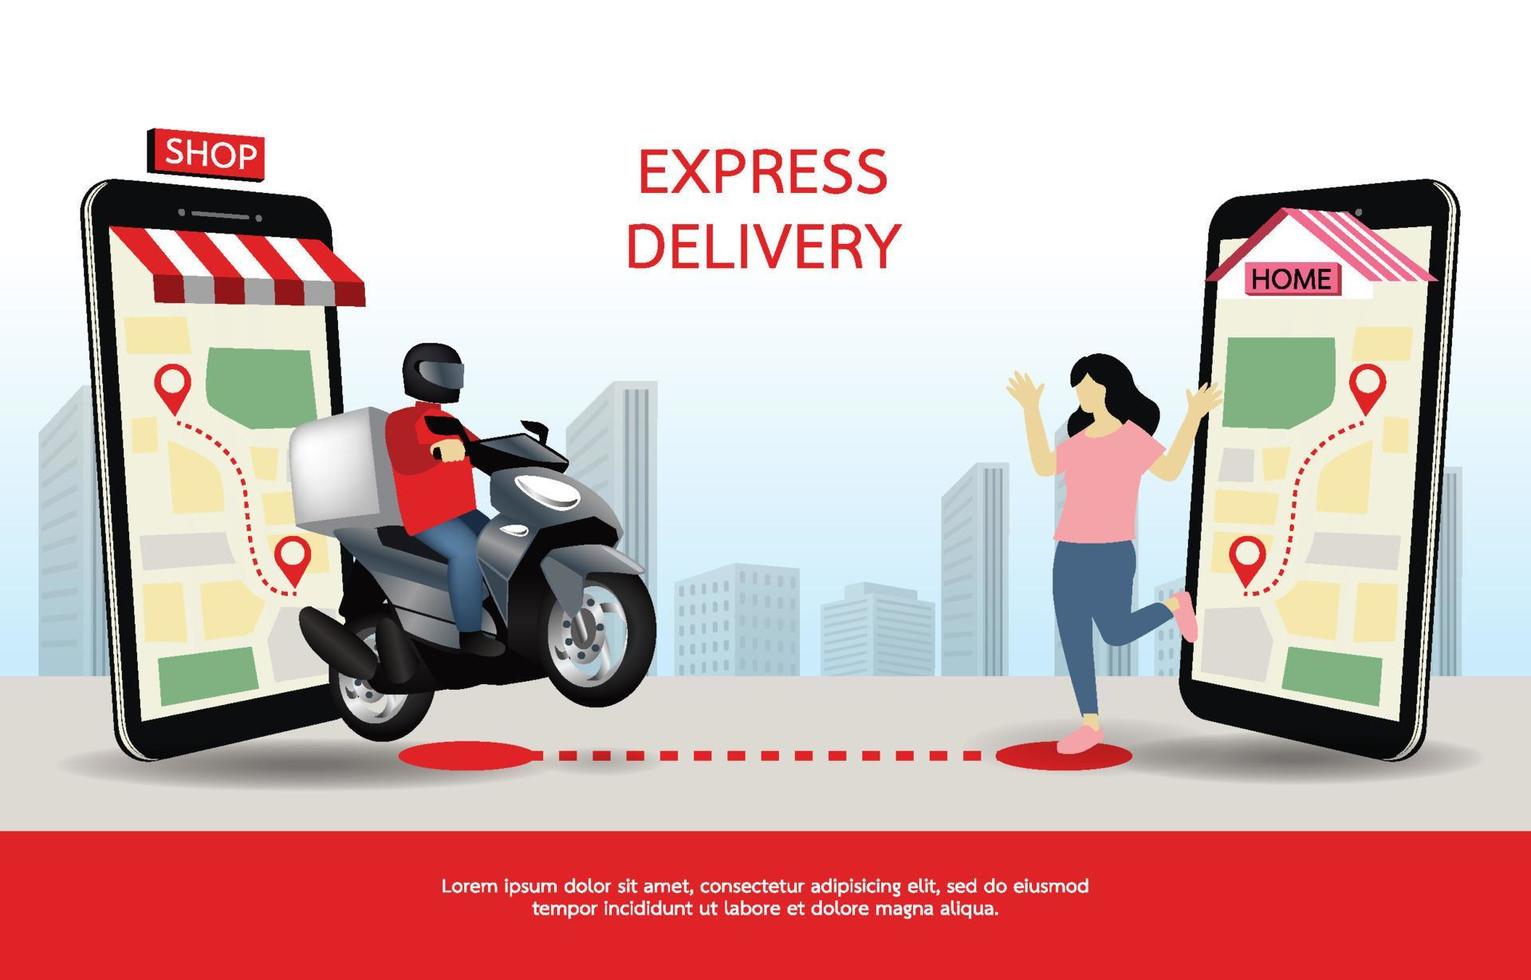 Happy woman waiting to receive the package from the delivery man. Mobile phone showing parcel status and location. Fast motorbike driver to deliver on time. Design for banner, illustration, website. vector